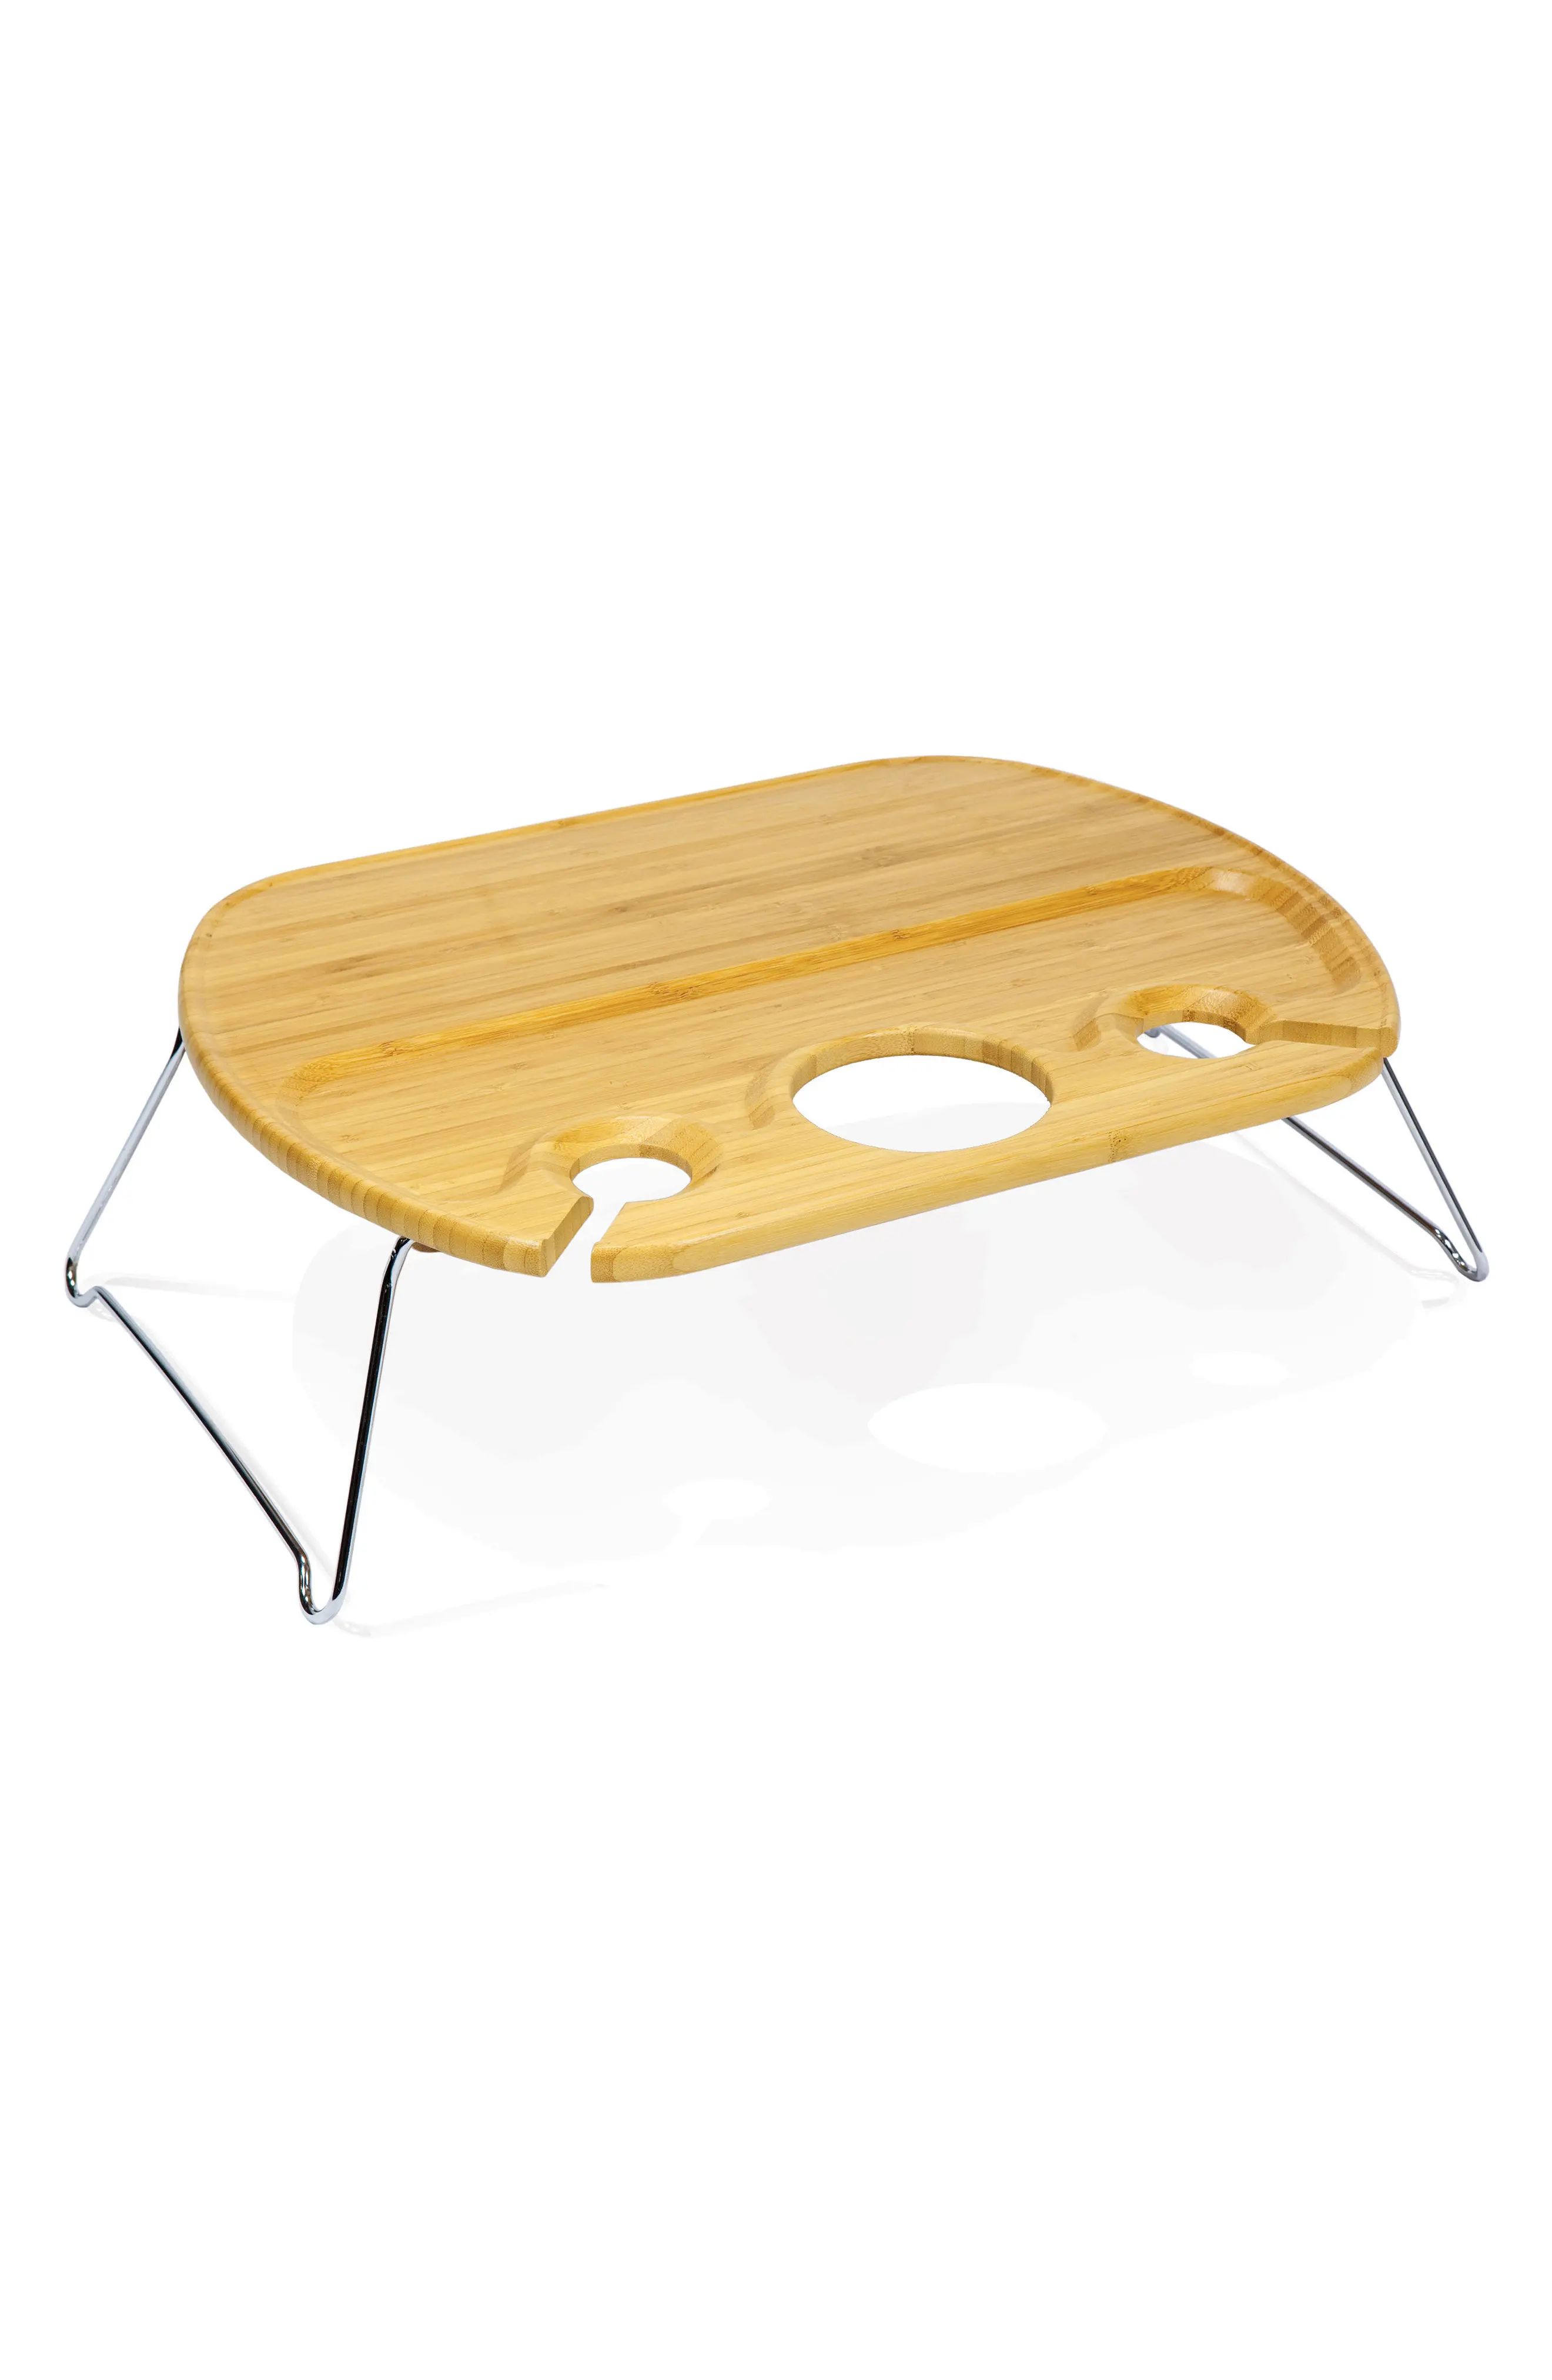 Picnic Time Mesamio Collapsible Wine & Snack Table | Nordstrom